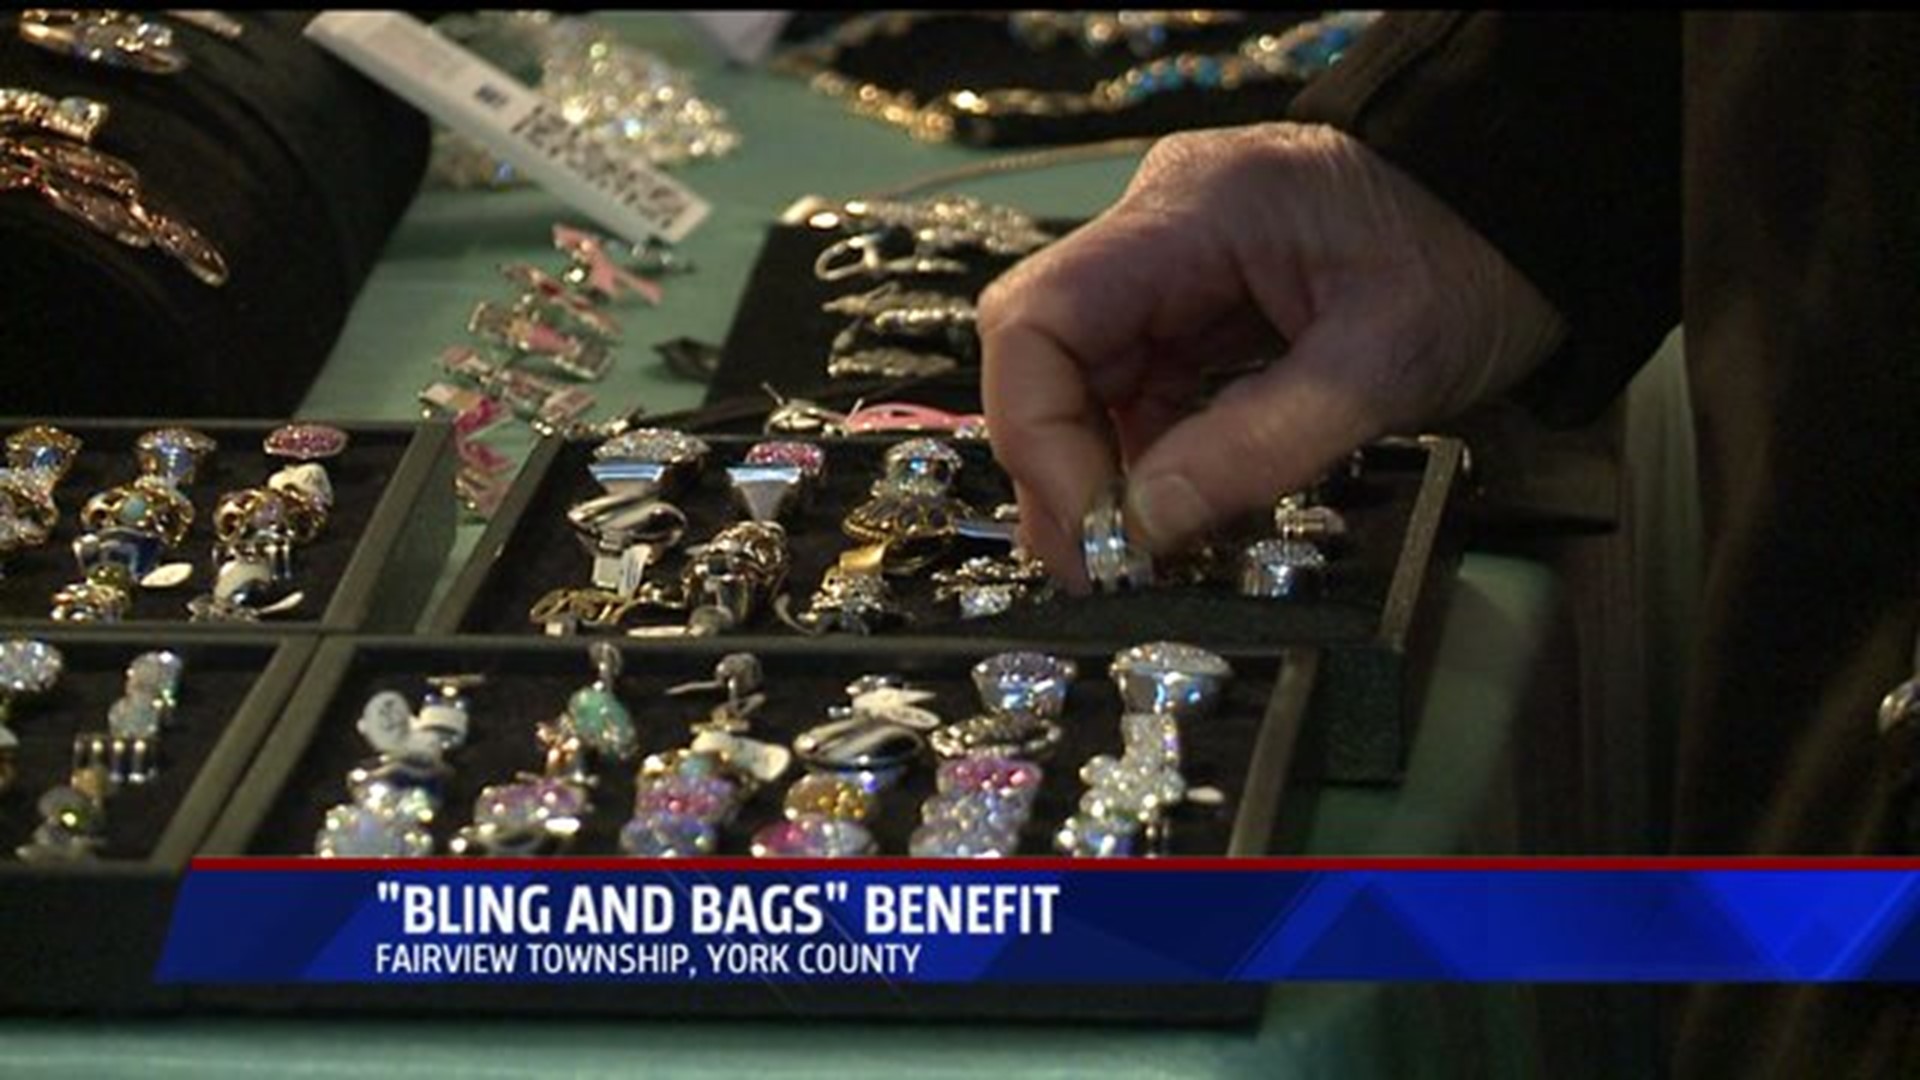 The "Bling and Bags Benefit"